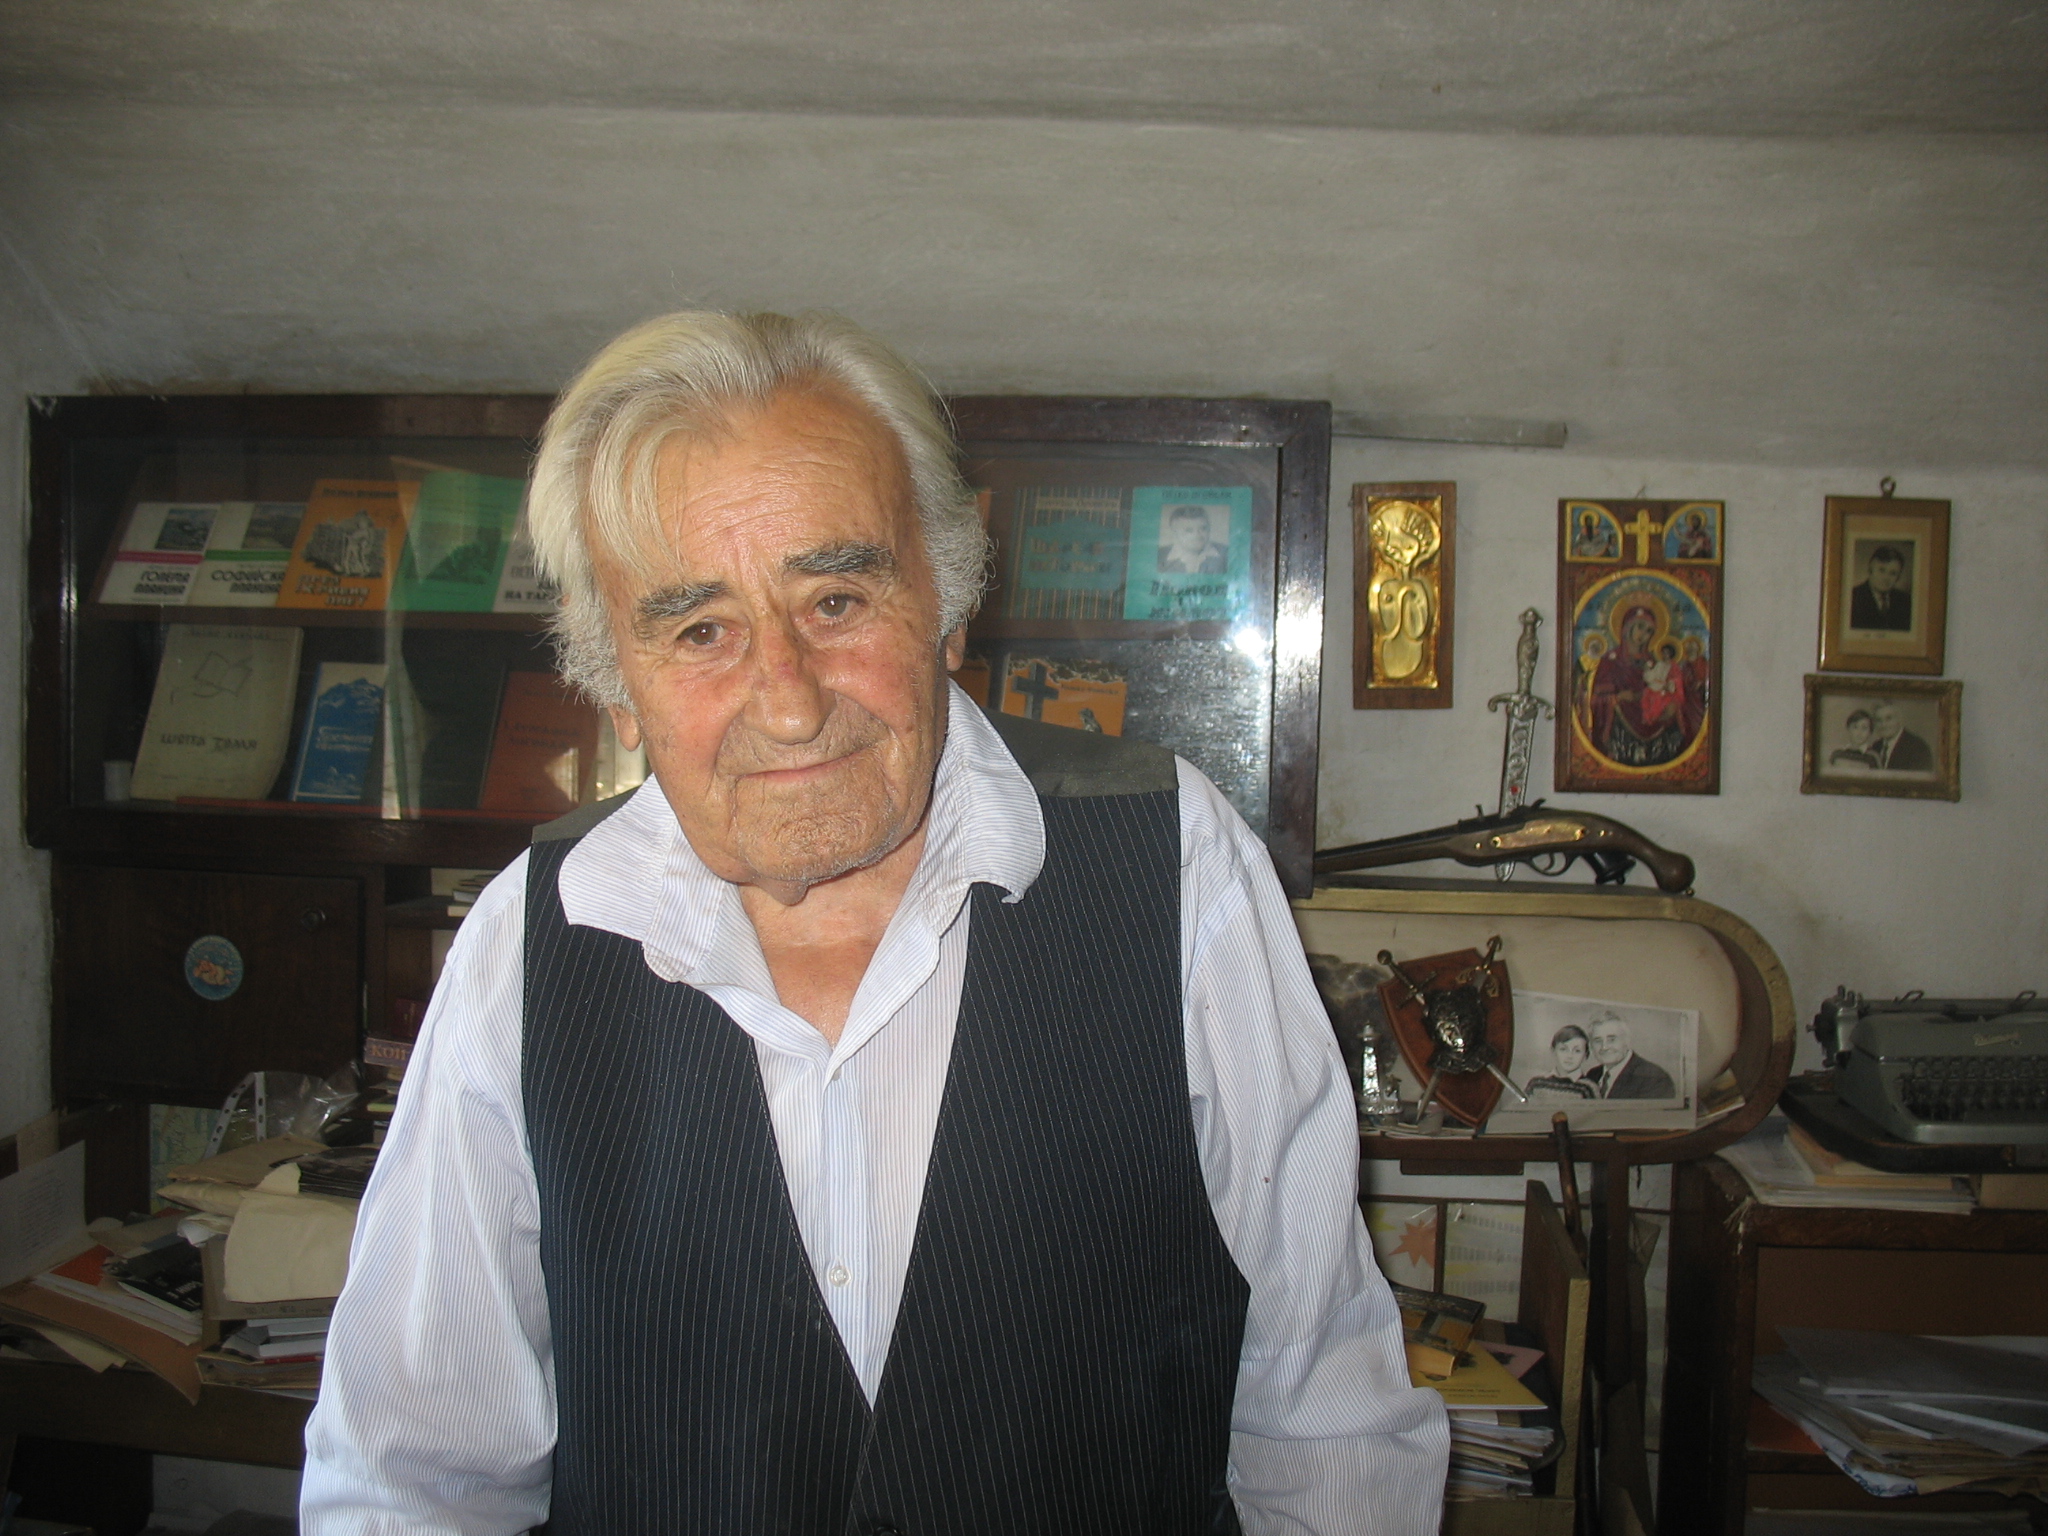 Petko Ogoyski with a part of his publications in the background, photo by Anelia A. Kassabova, 2016